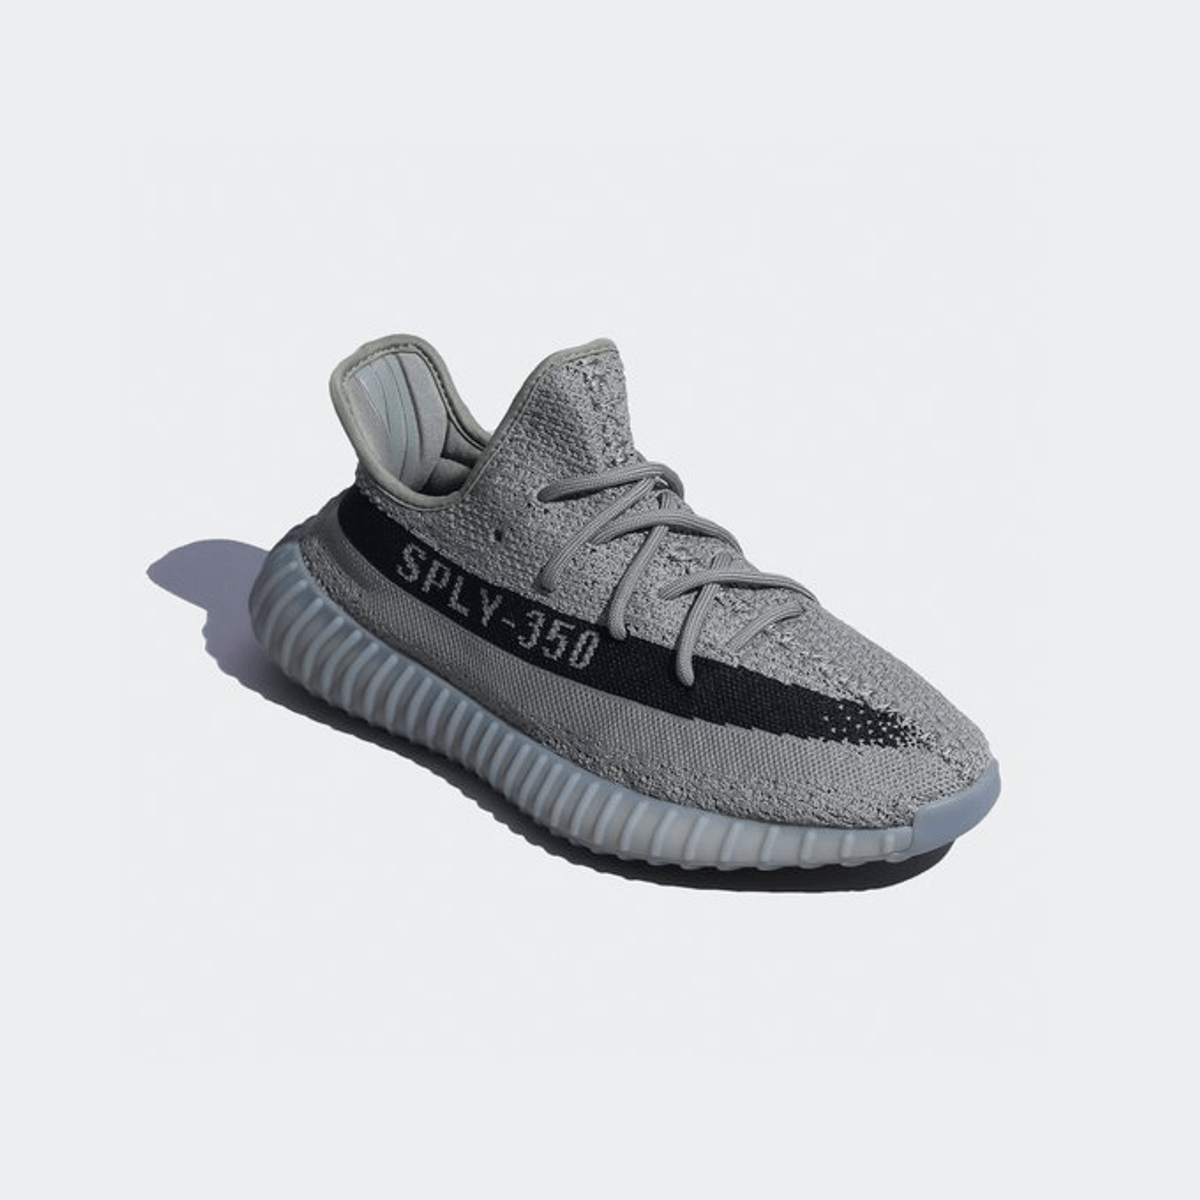 Adidas Will Release The YEEZY 350 V2 Granite After Cutting Ties With Kanye West